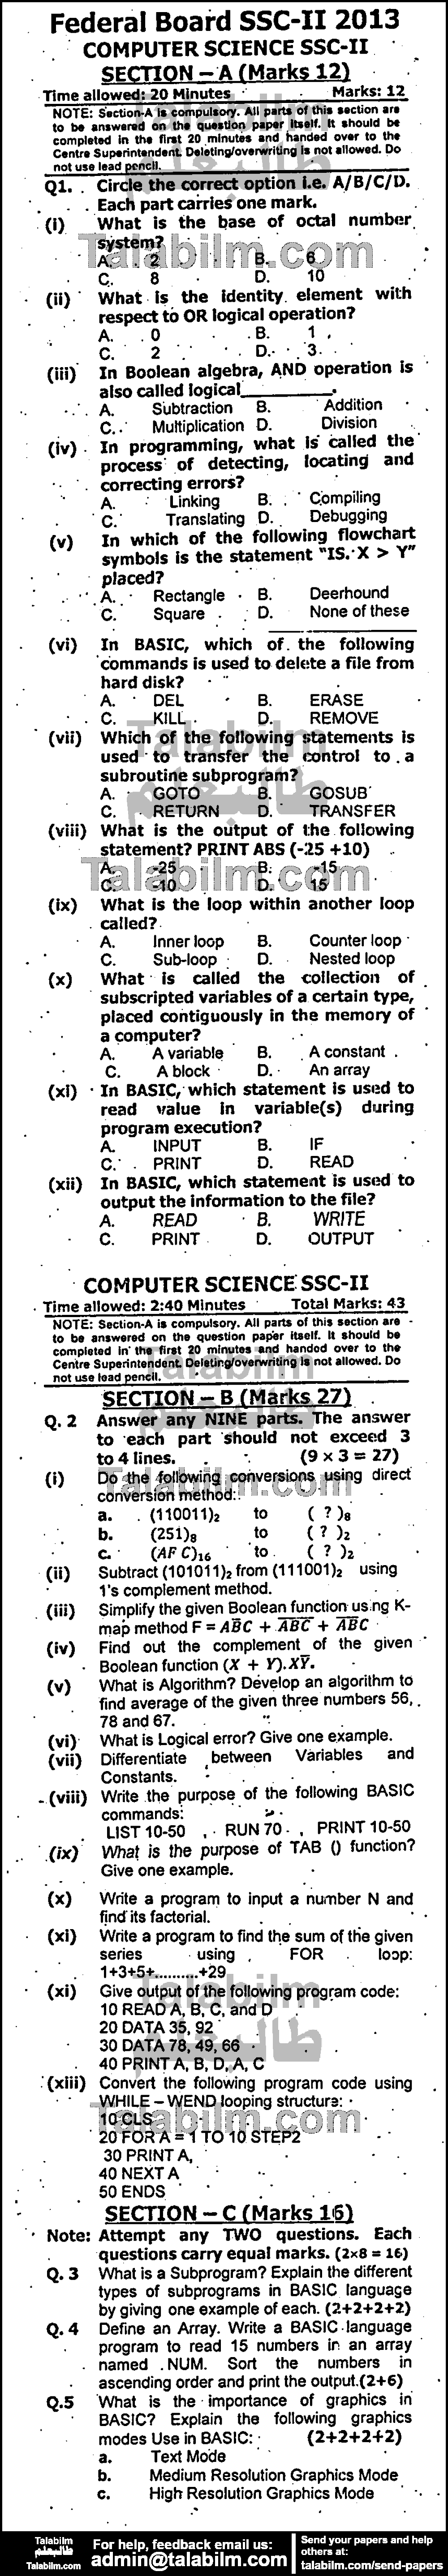 Computer Science 0 past paper for 2013 Group-I